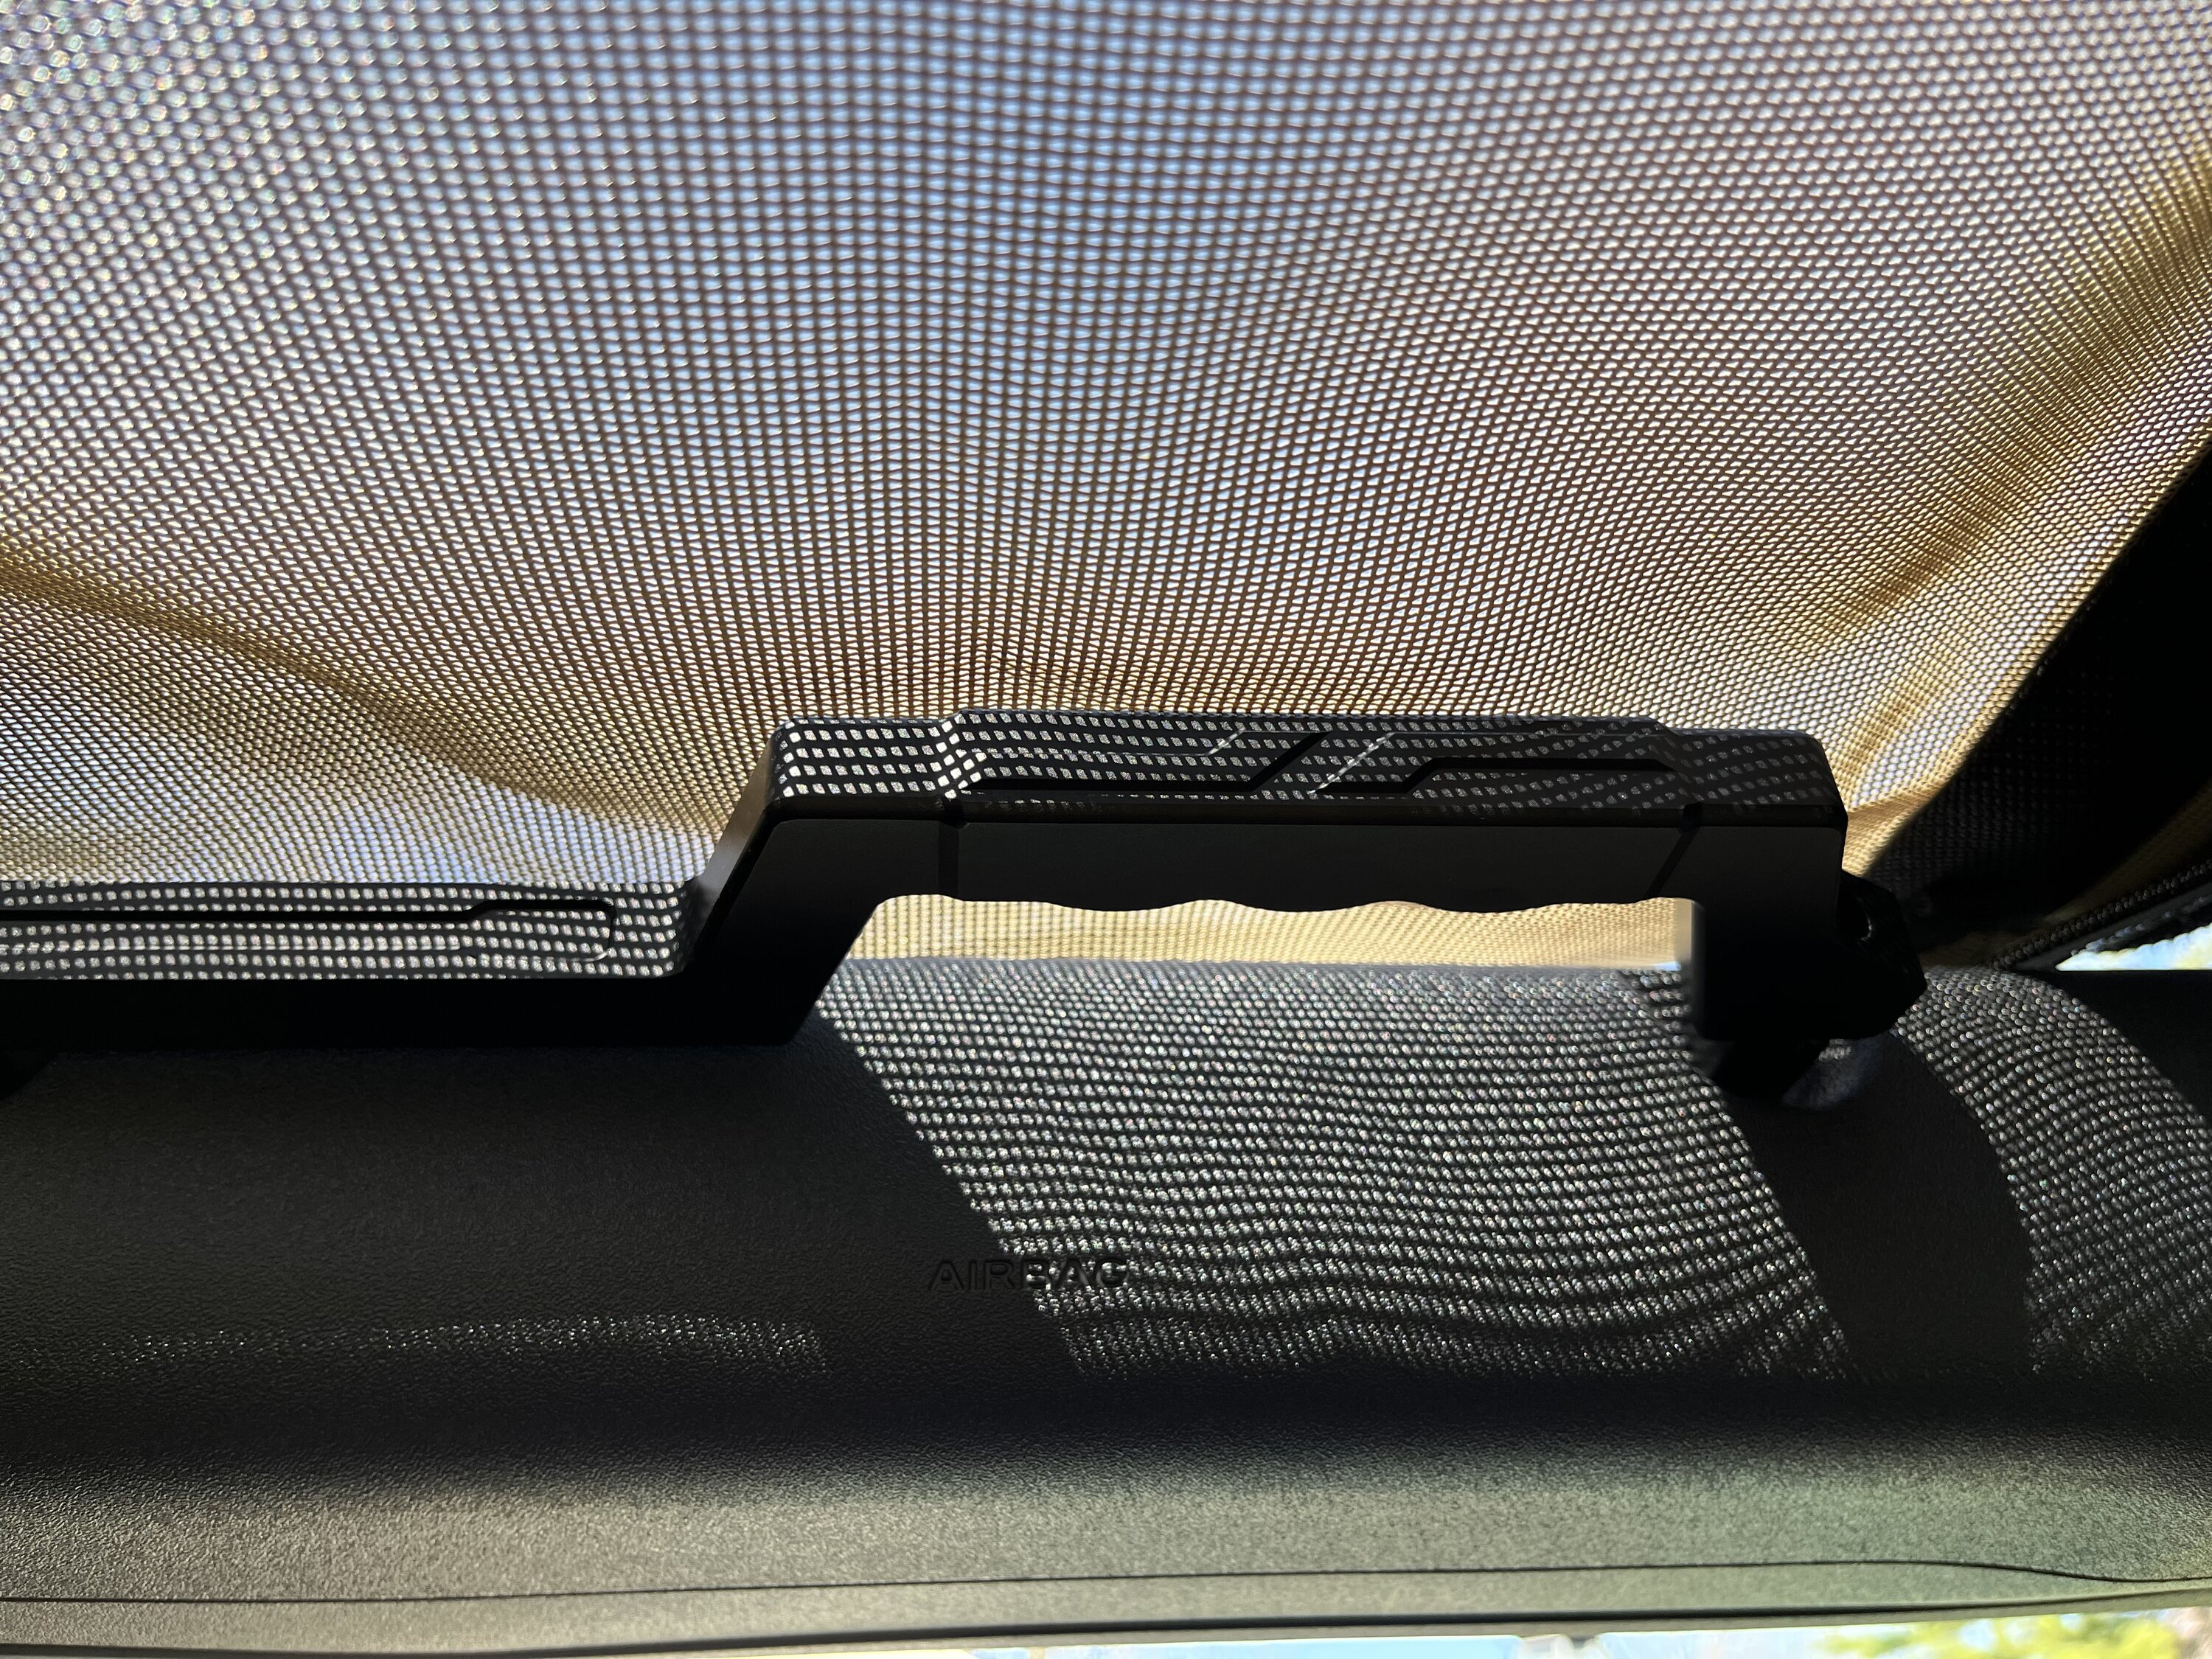 Ford Bronco Was topless till I put a Bimini top on (also installed new speakers) 4142AA05-B6BD-4A5D-867F-4B48104E469F